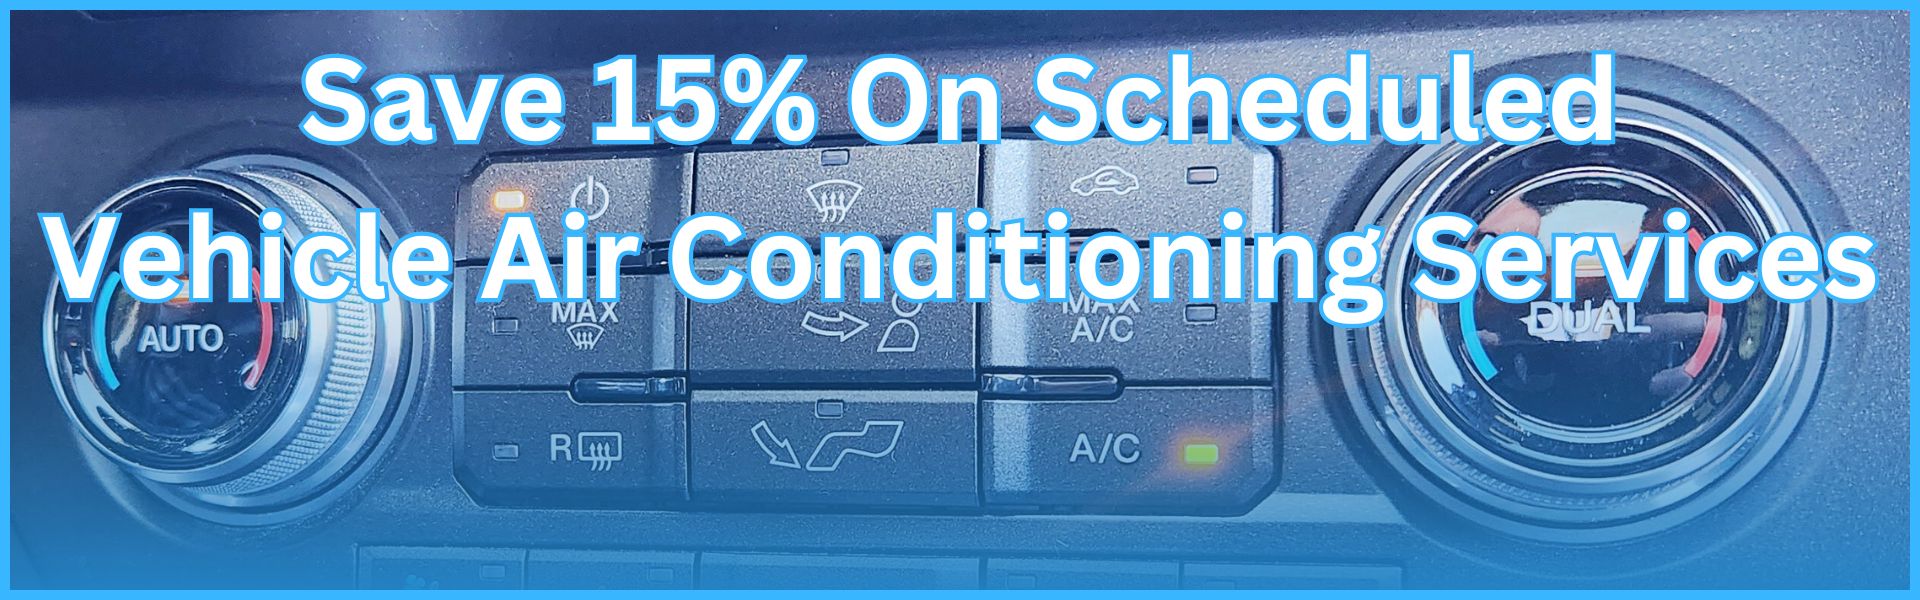 Save 15% Off Vehicle Air Conditioning Services